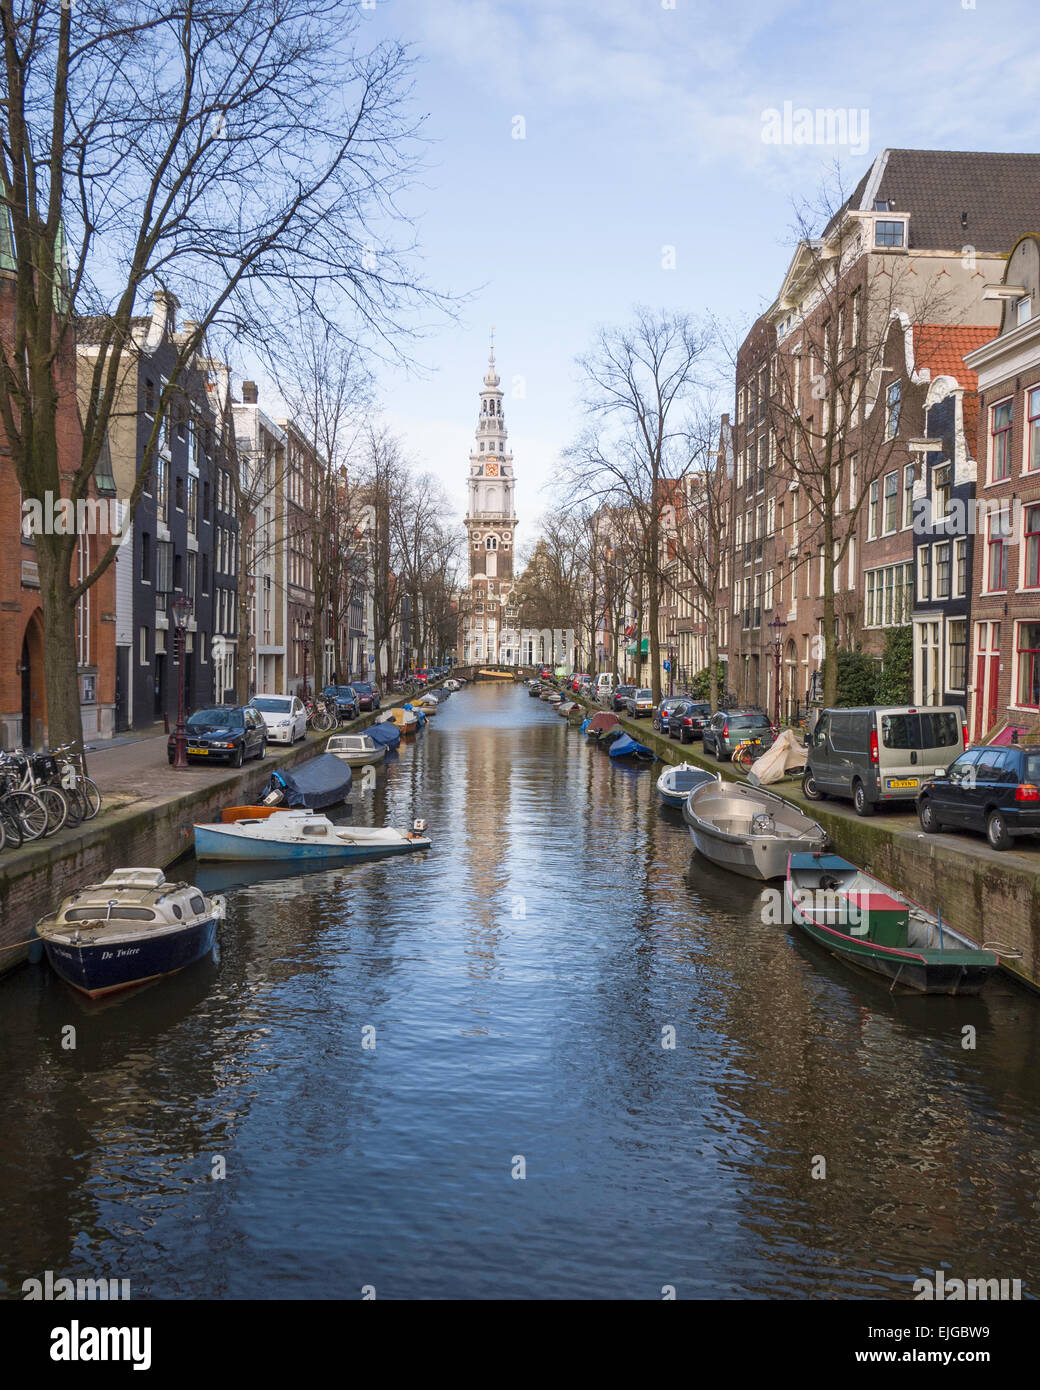 View along Groenbugrwal canal towards the tower of Zuiderkerk ('South Church') (1603-1611), Amsterdam, Netherlands. Stock Photo